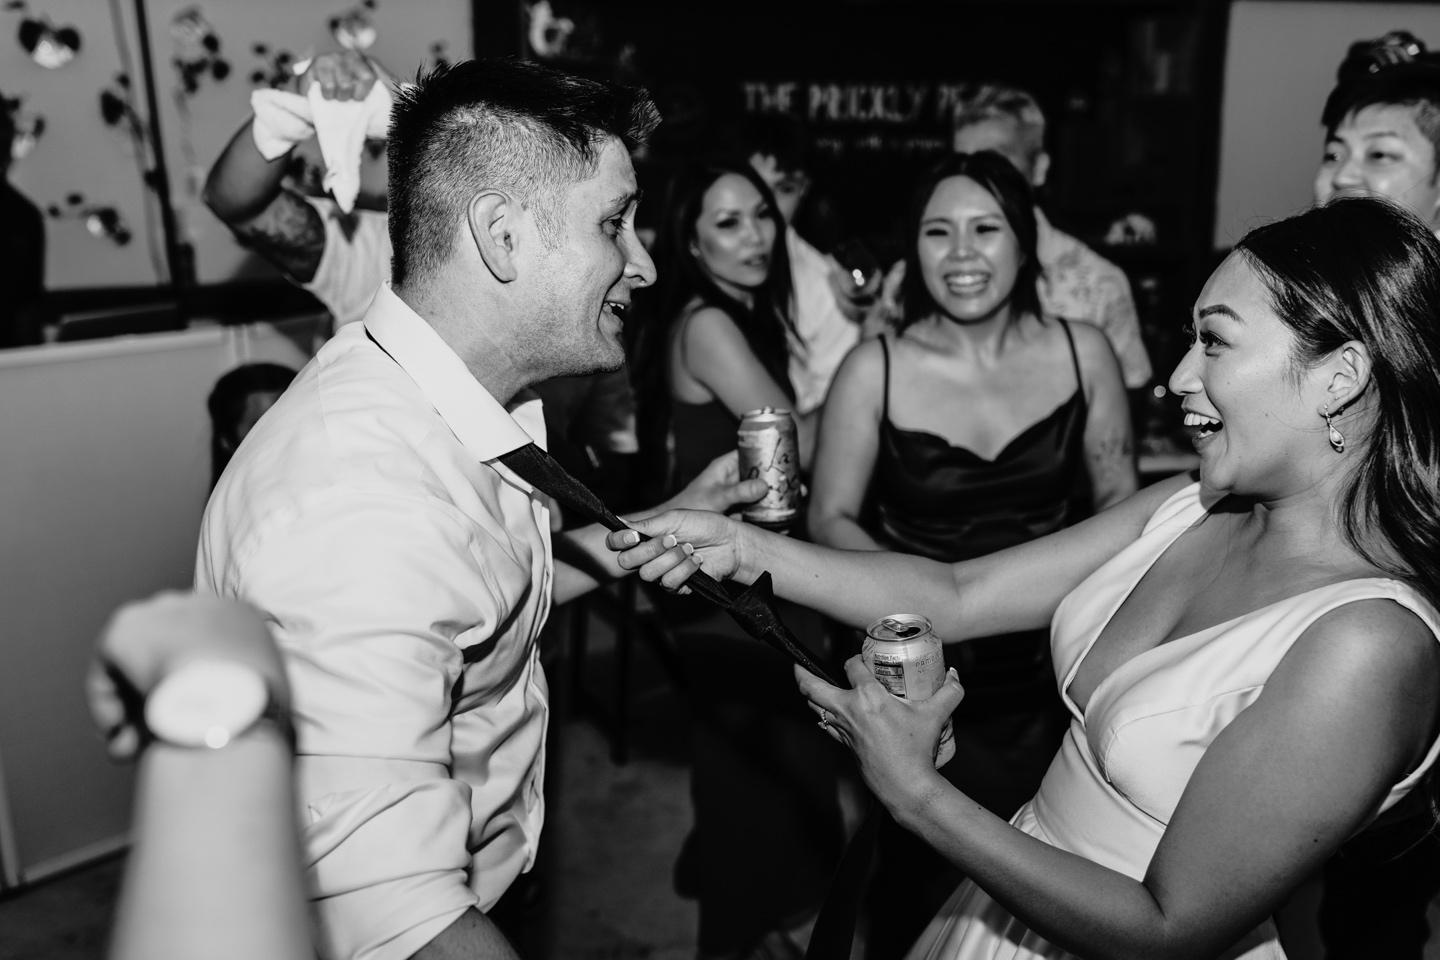 Bride and groom dancing together at their Prickly Pear wedding reception in Sacramento, CA.